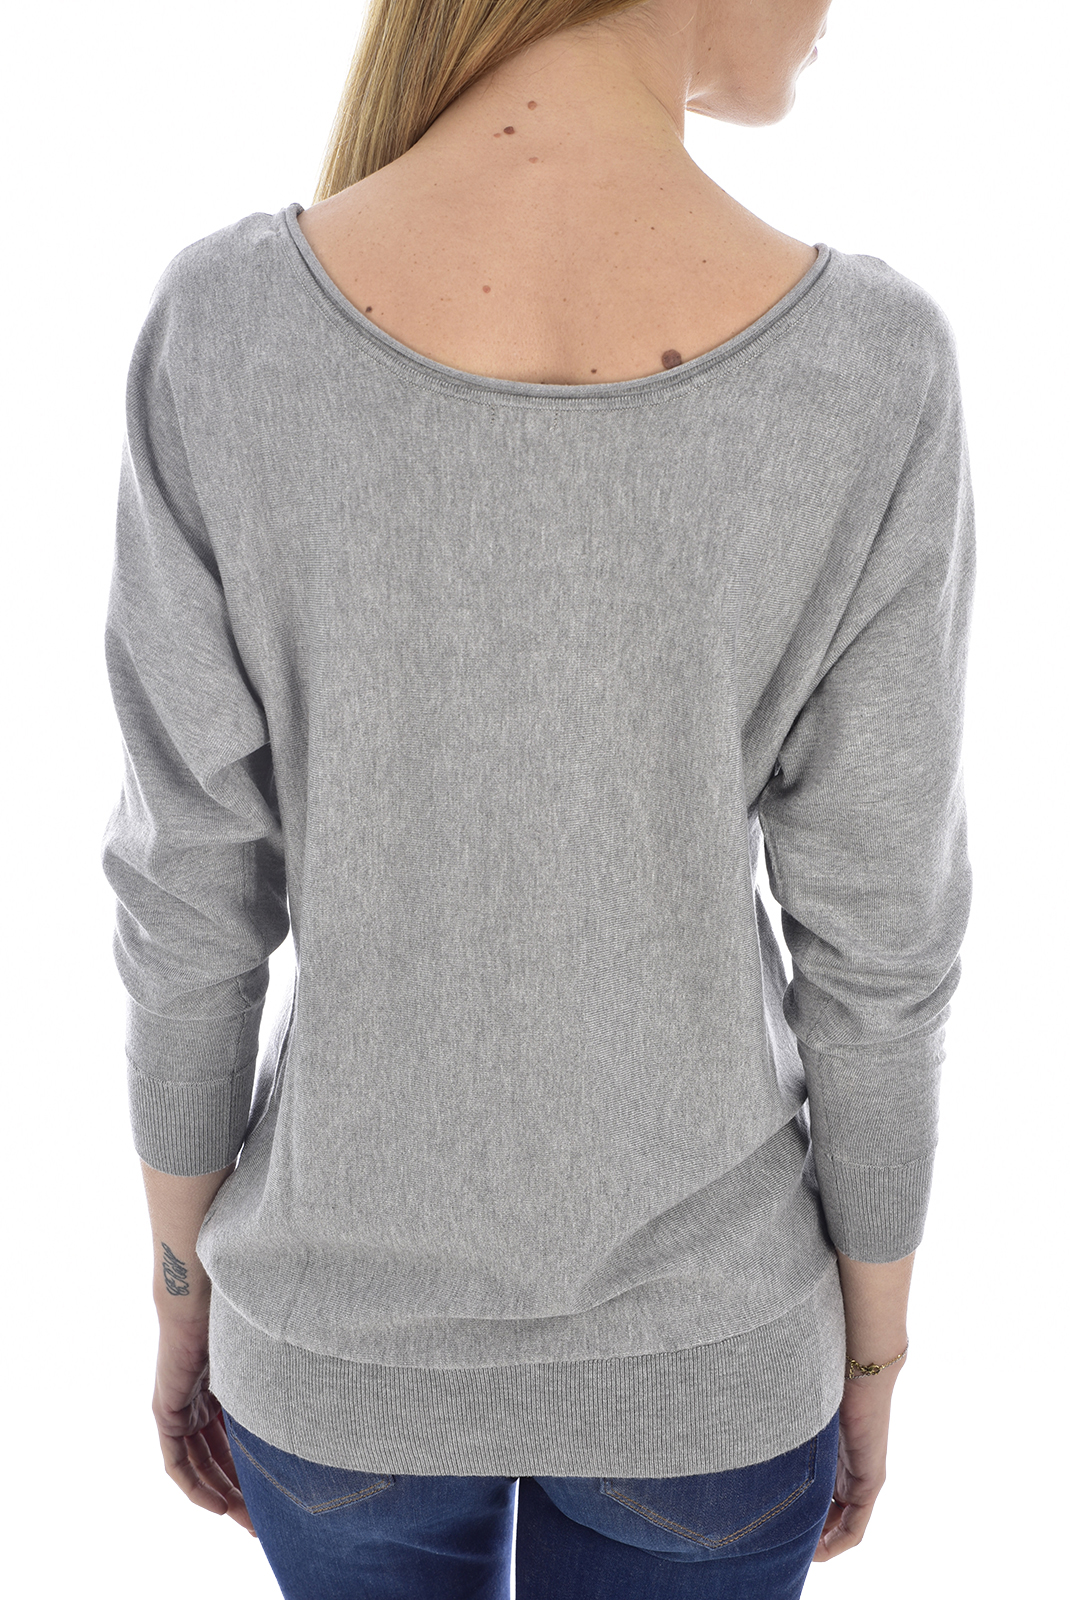 Pull gris strass pour femme - Guess W93r59 